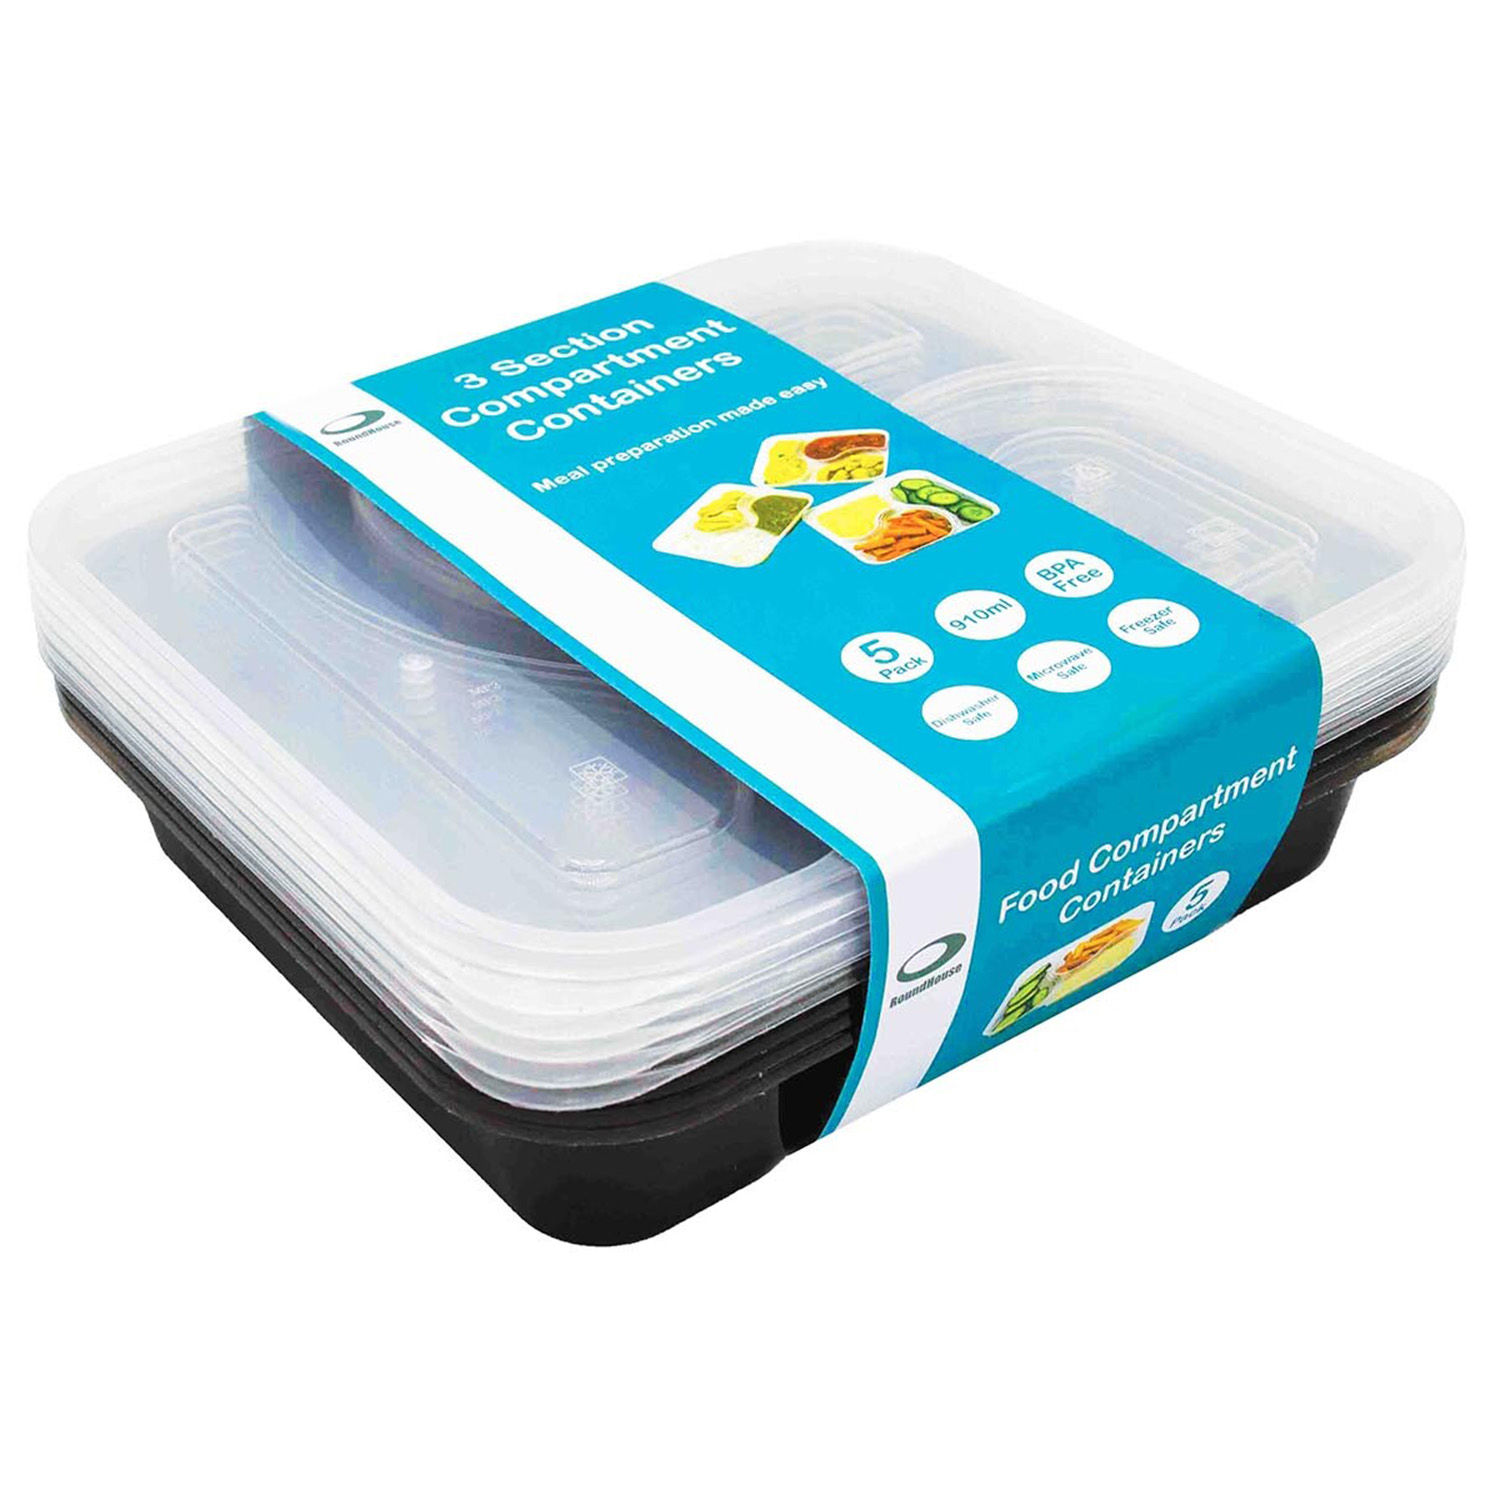 Pack of 5 Compartment Containers - Black Image